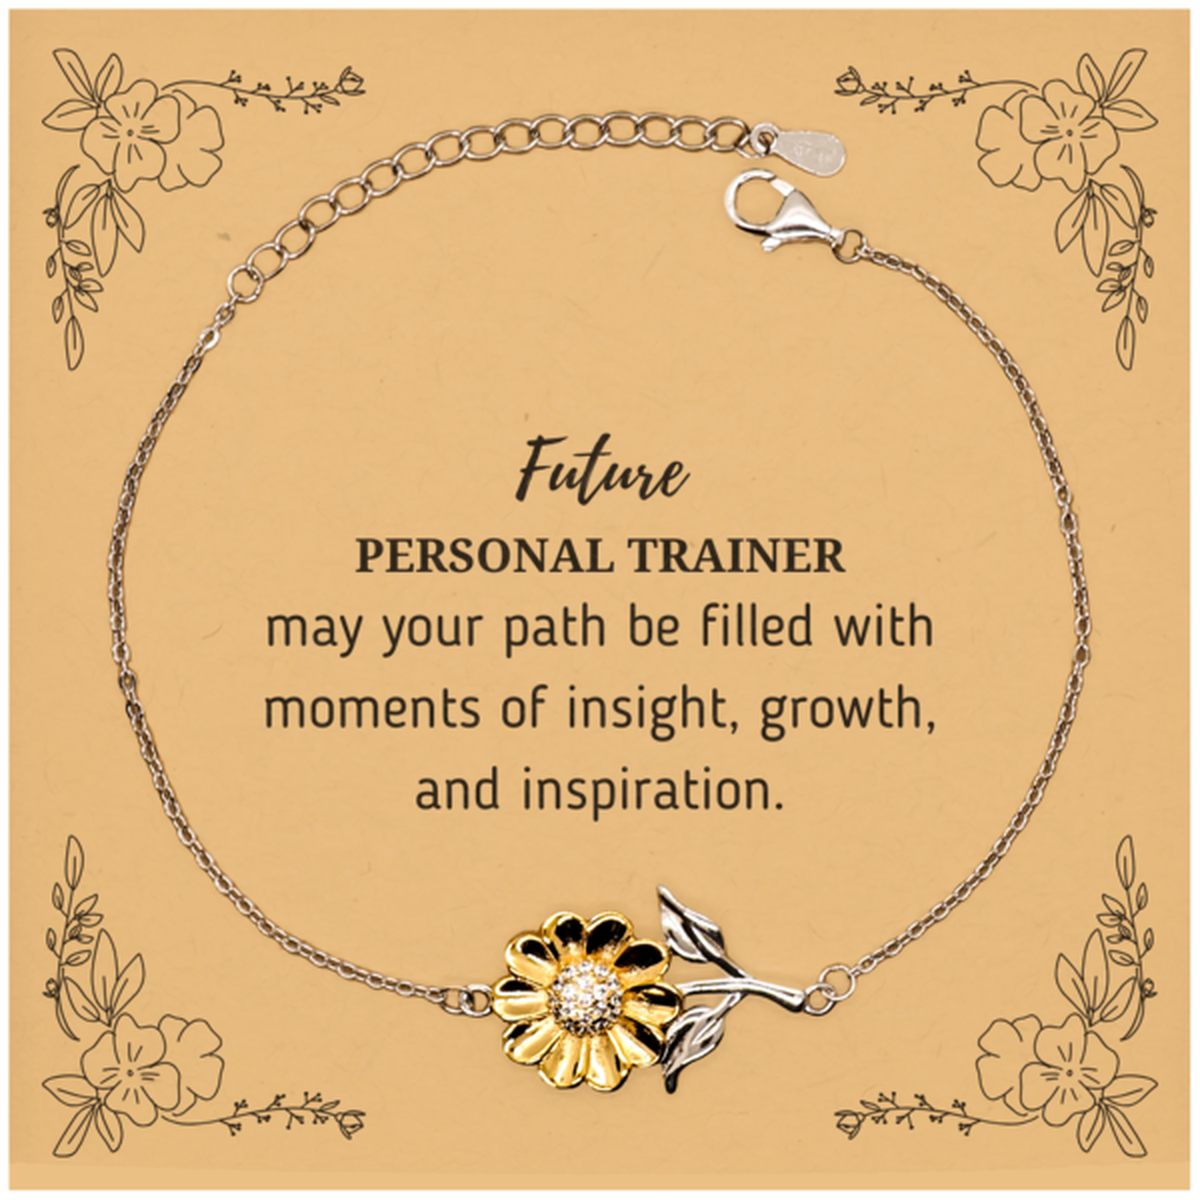 Future Personal Trainer Gifts, May your path be filled with moments of insight, Graduation Gifts for New Personal Trainer, Christmas Unique Sunflower Bracelet For Men, Women, Friends